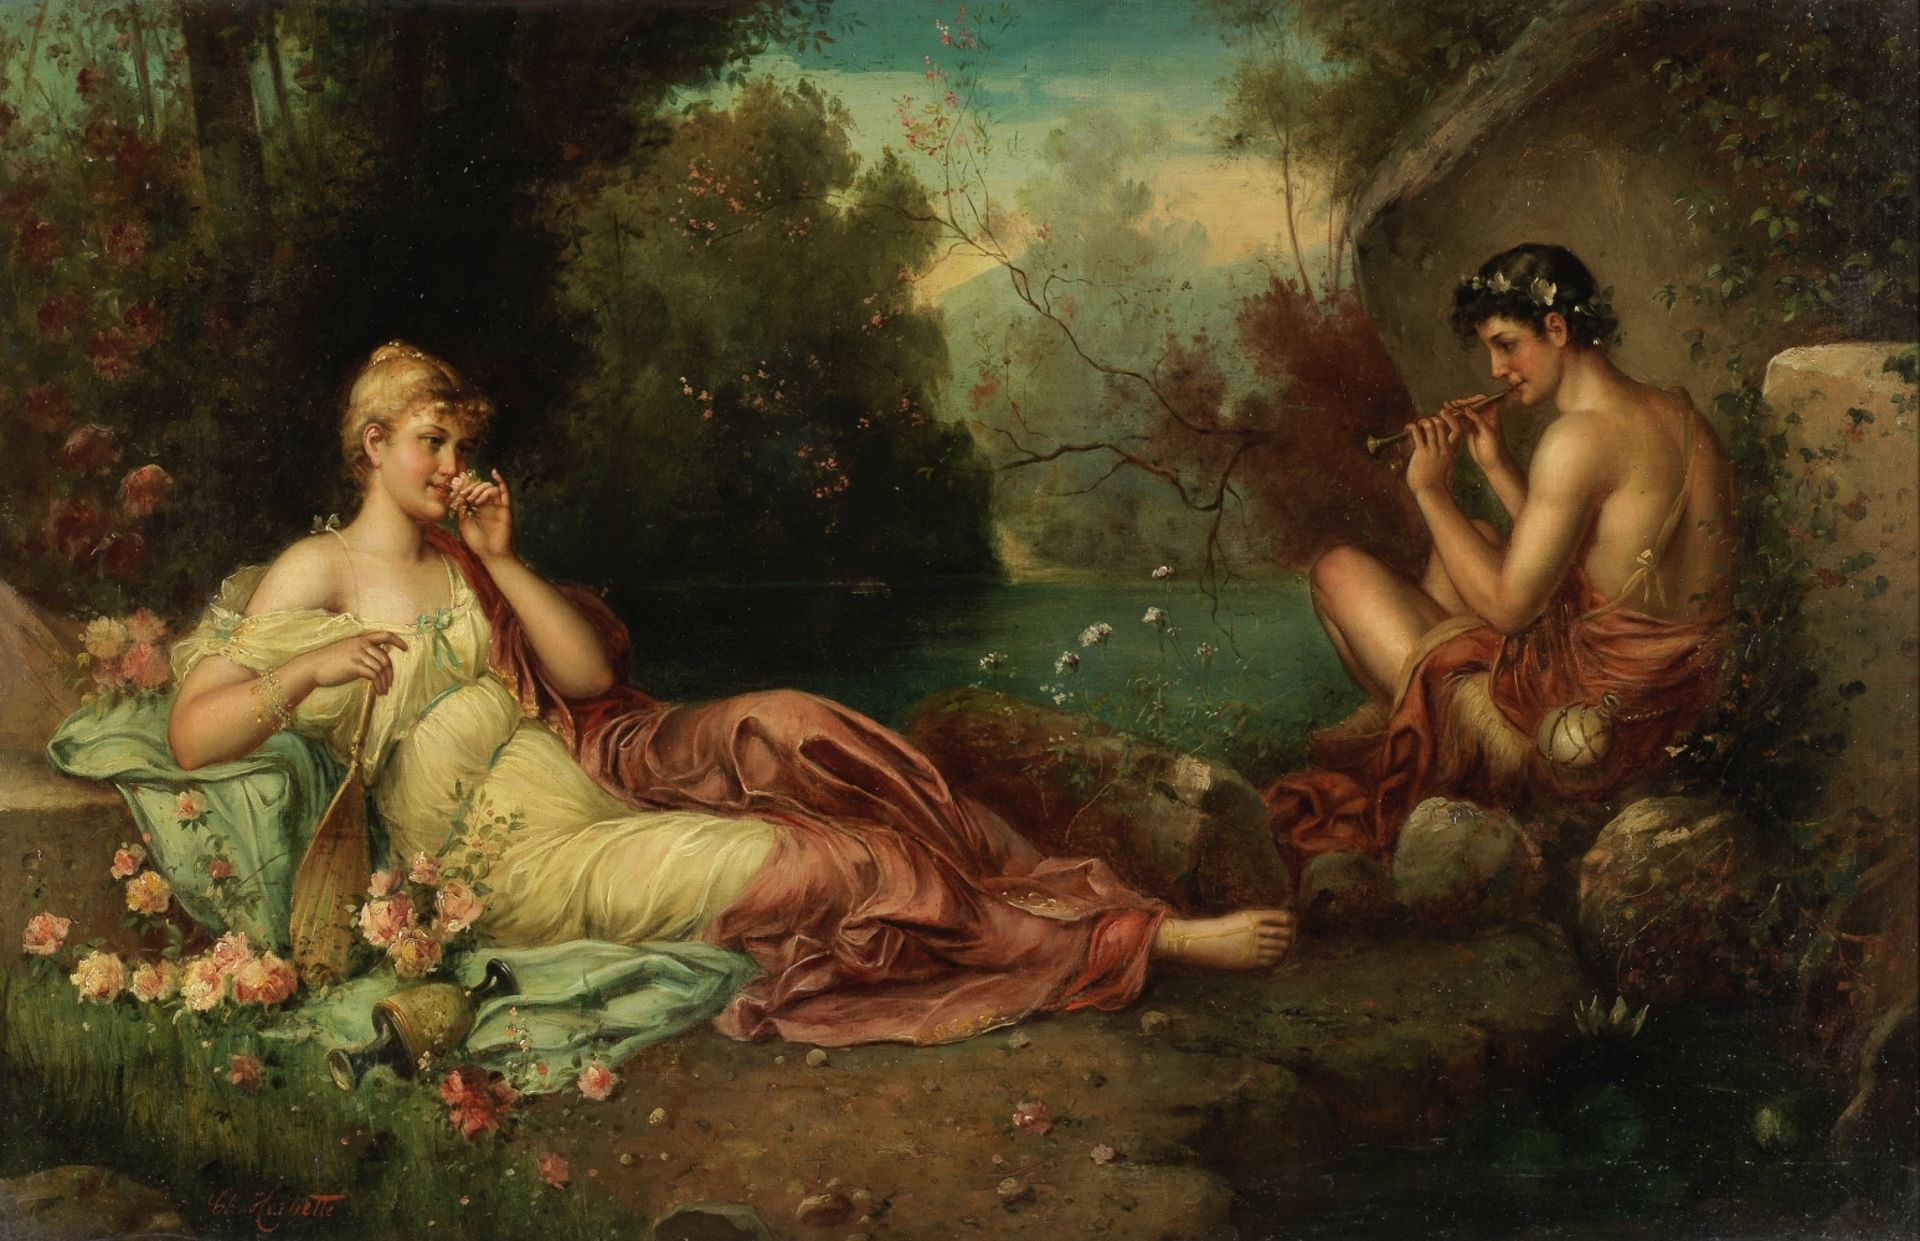 Charles Herbette (19th century) A seduction in the forest